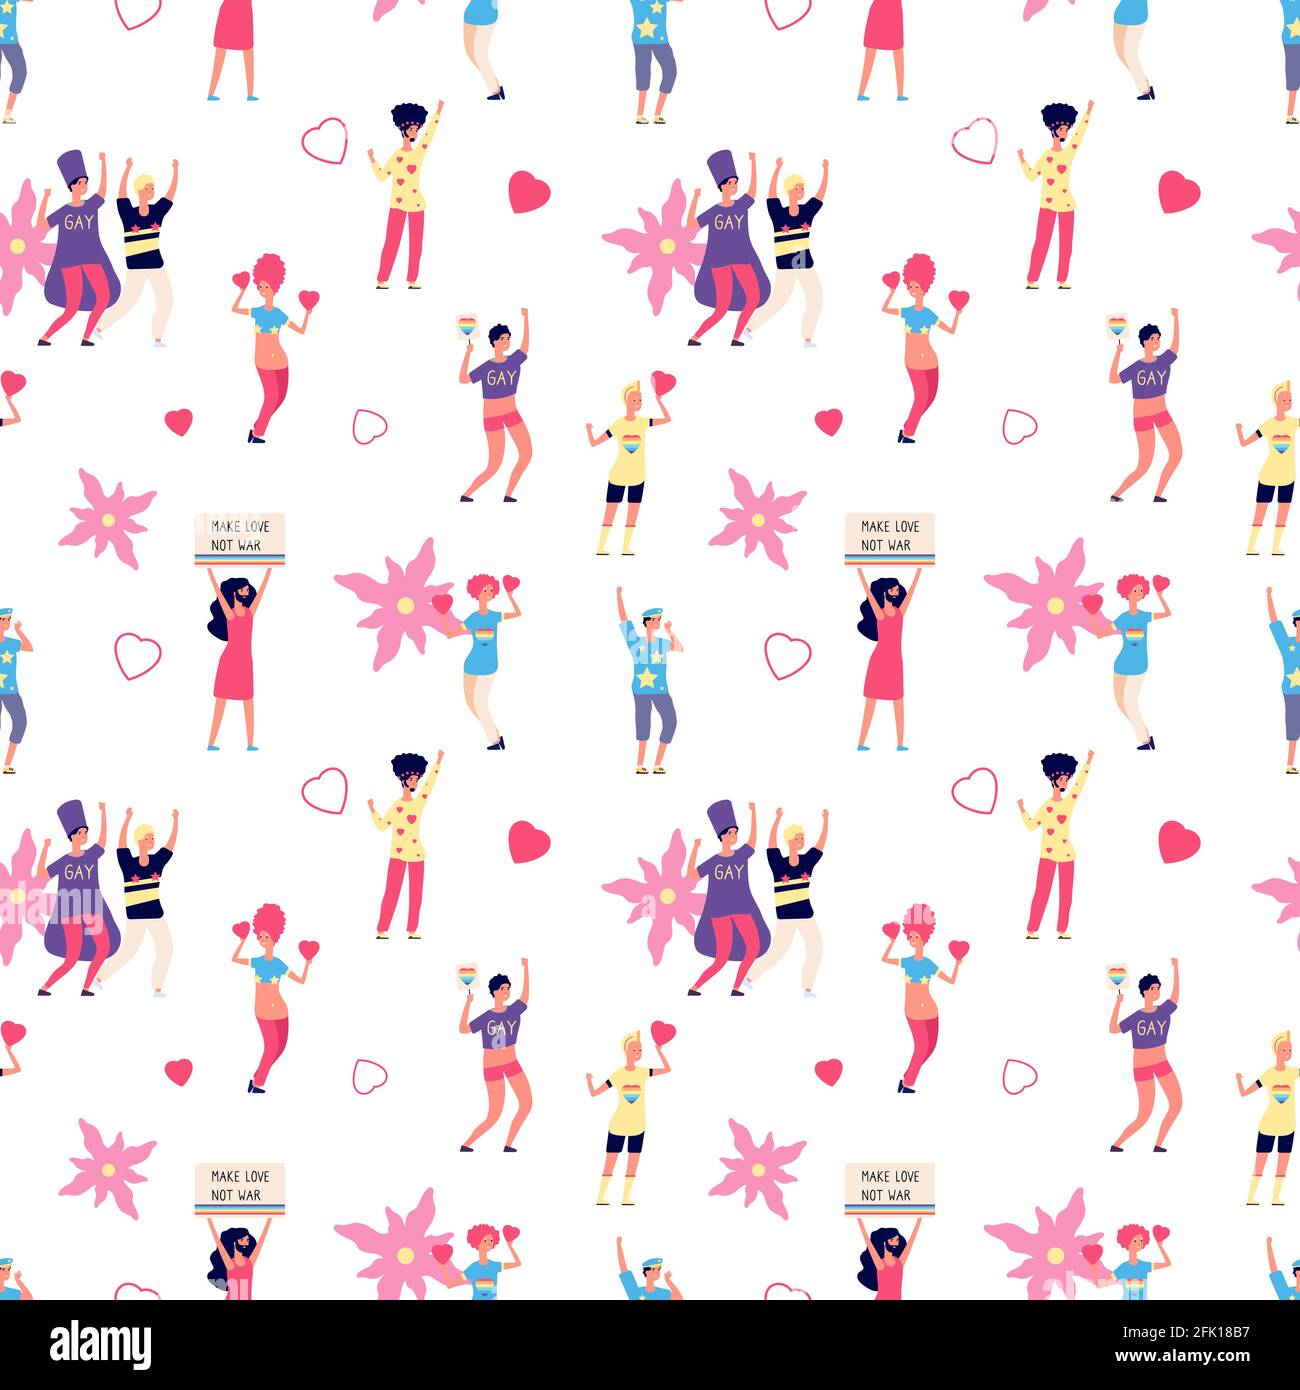 Gay pride. LGBT background with rainbow hearts and flowers. Bisexual, lesbian and transgender vector seamless pattern Stock Vector